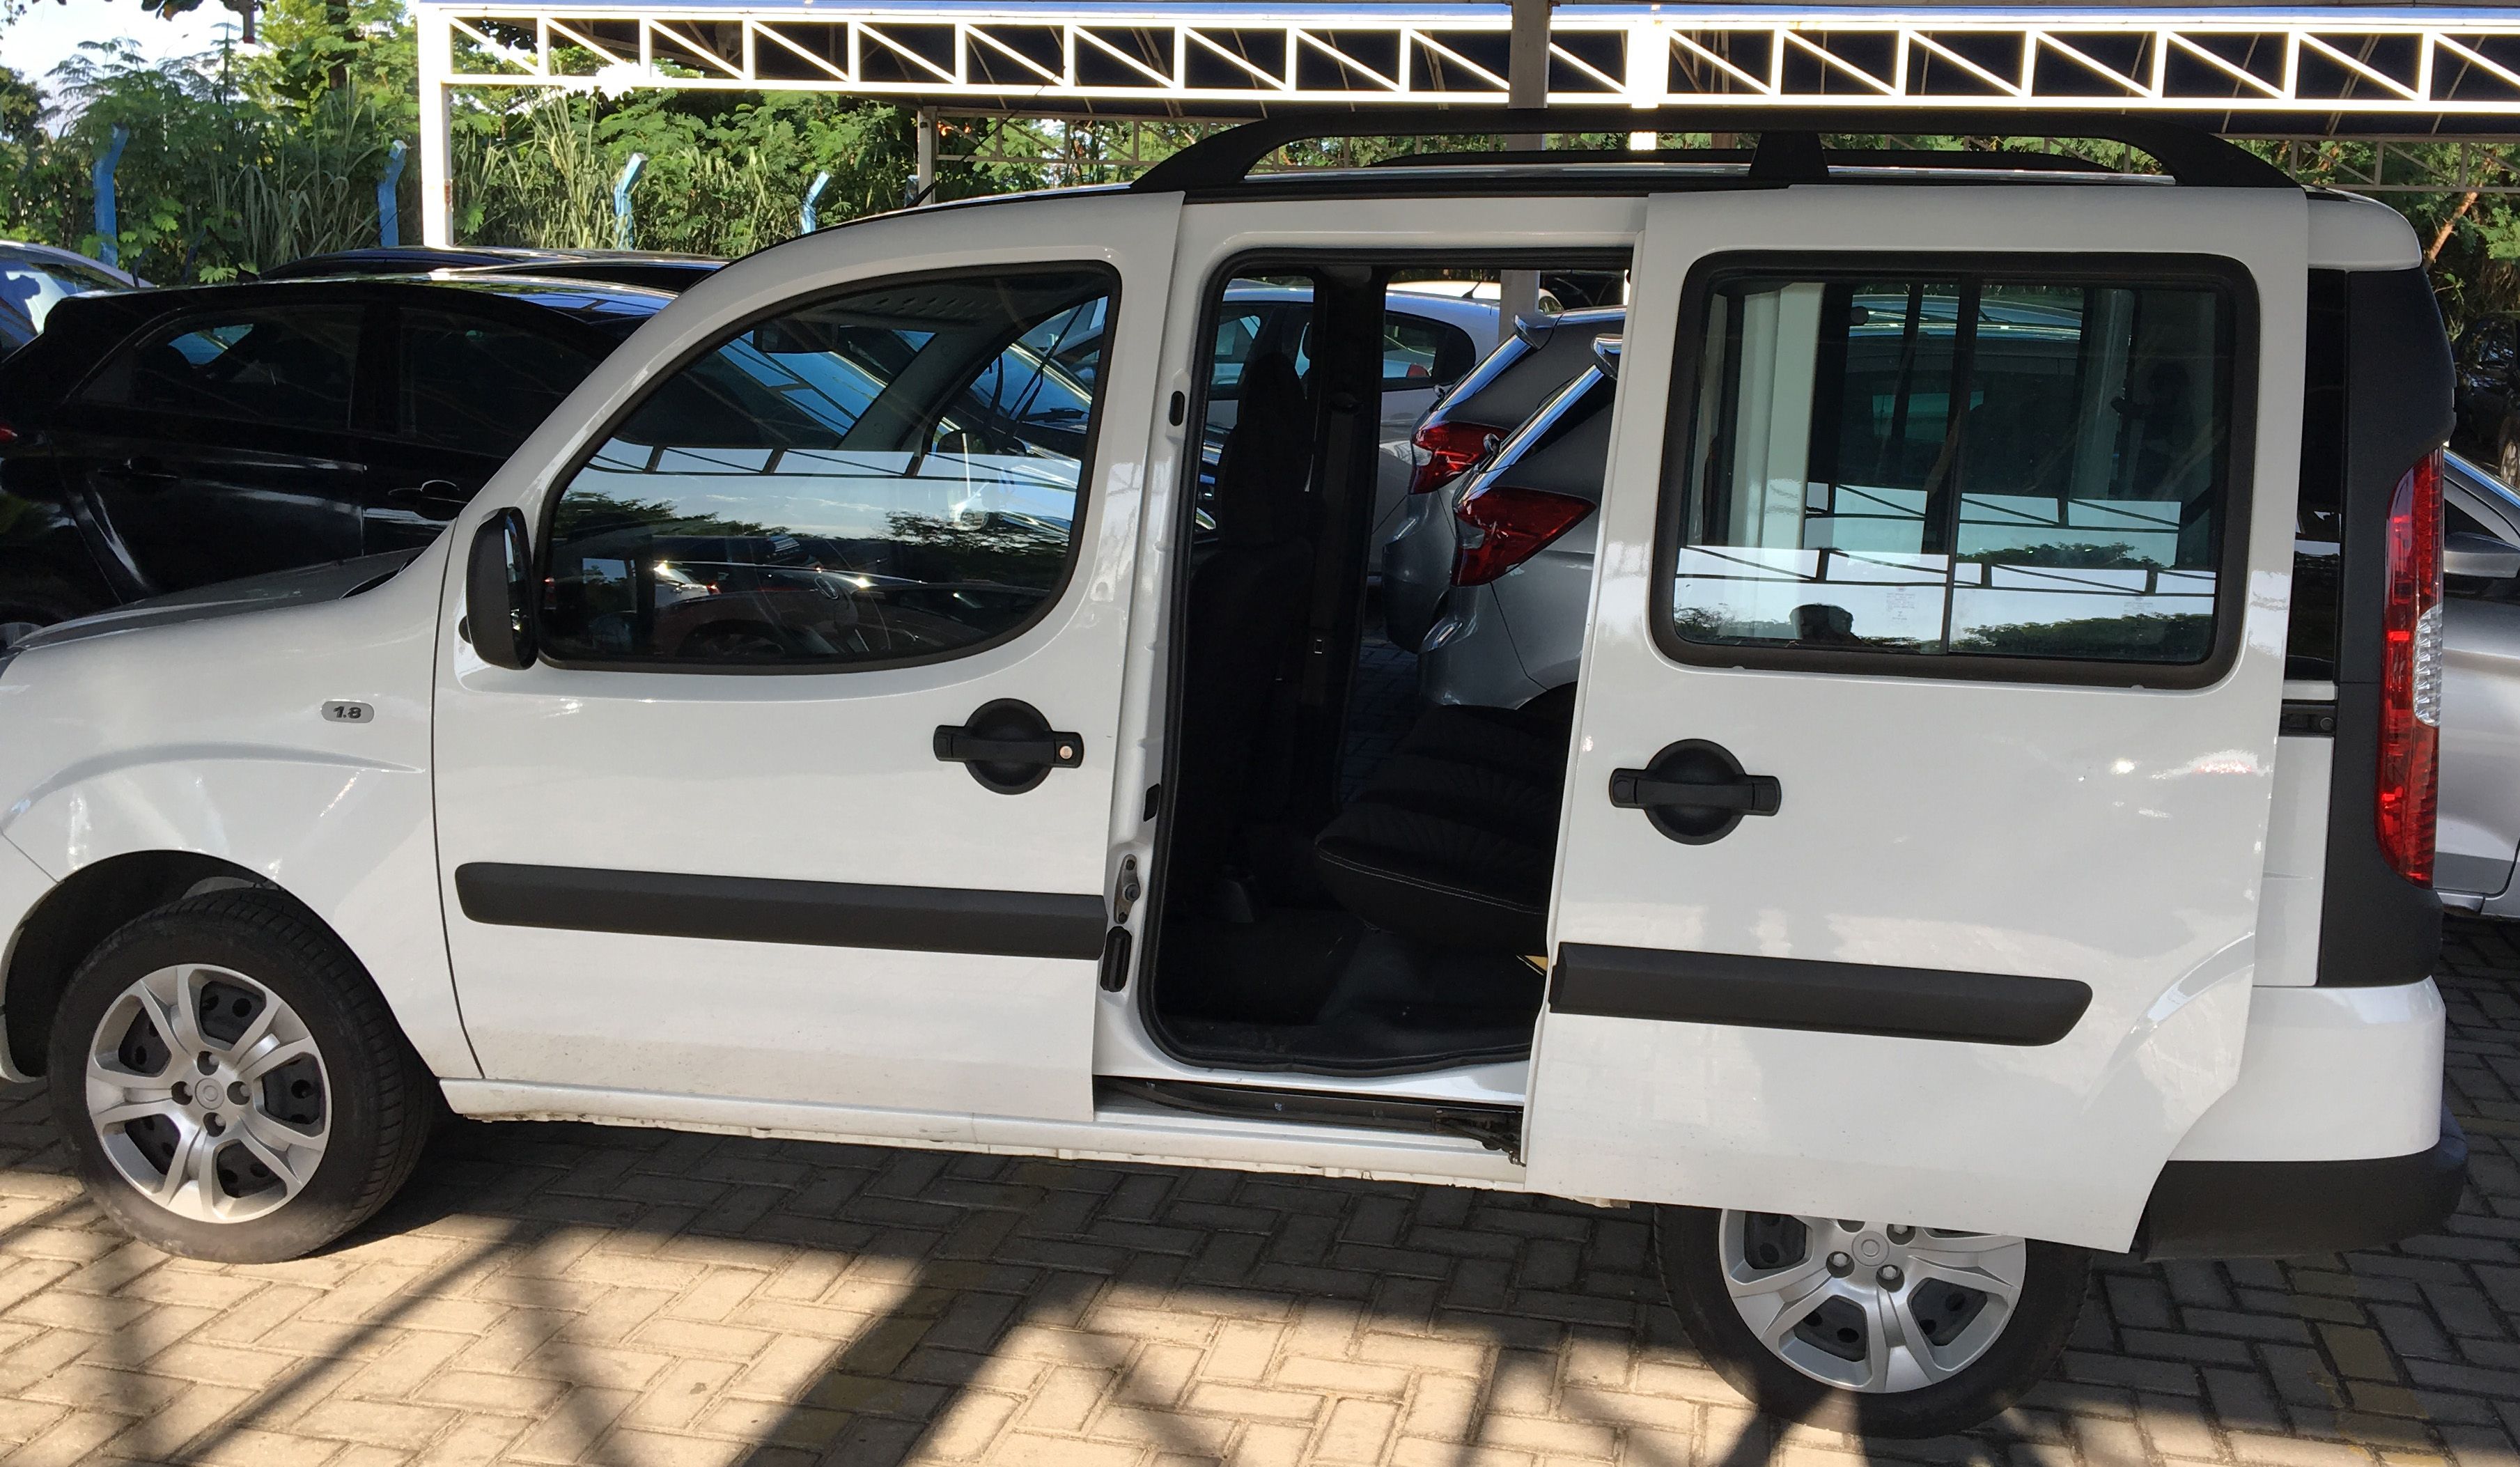 This 128-horsepower Fiat Doblo was the largest vehicle available for rent at Rio de Janeiro's international airport. The five-speed manual transmission might be unfamiliar to many Americans, and cars with automatic transmission are rare in Brazil. This grossly under-powered vehicle had a difficult time climbing steep hills. Image by Mark Hoffman. Brazil, 2017.